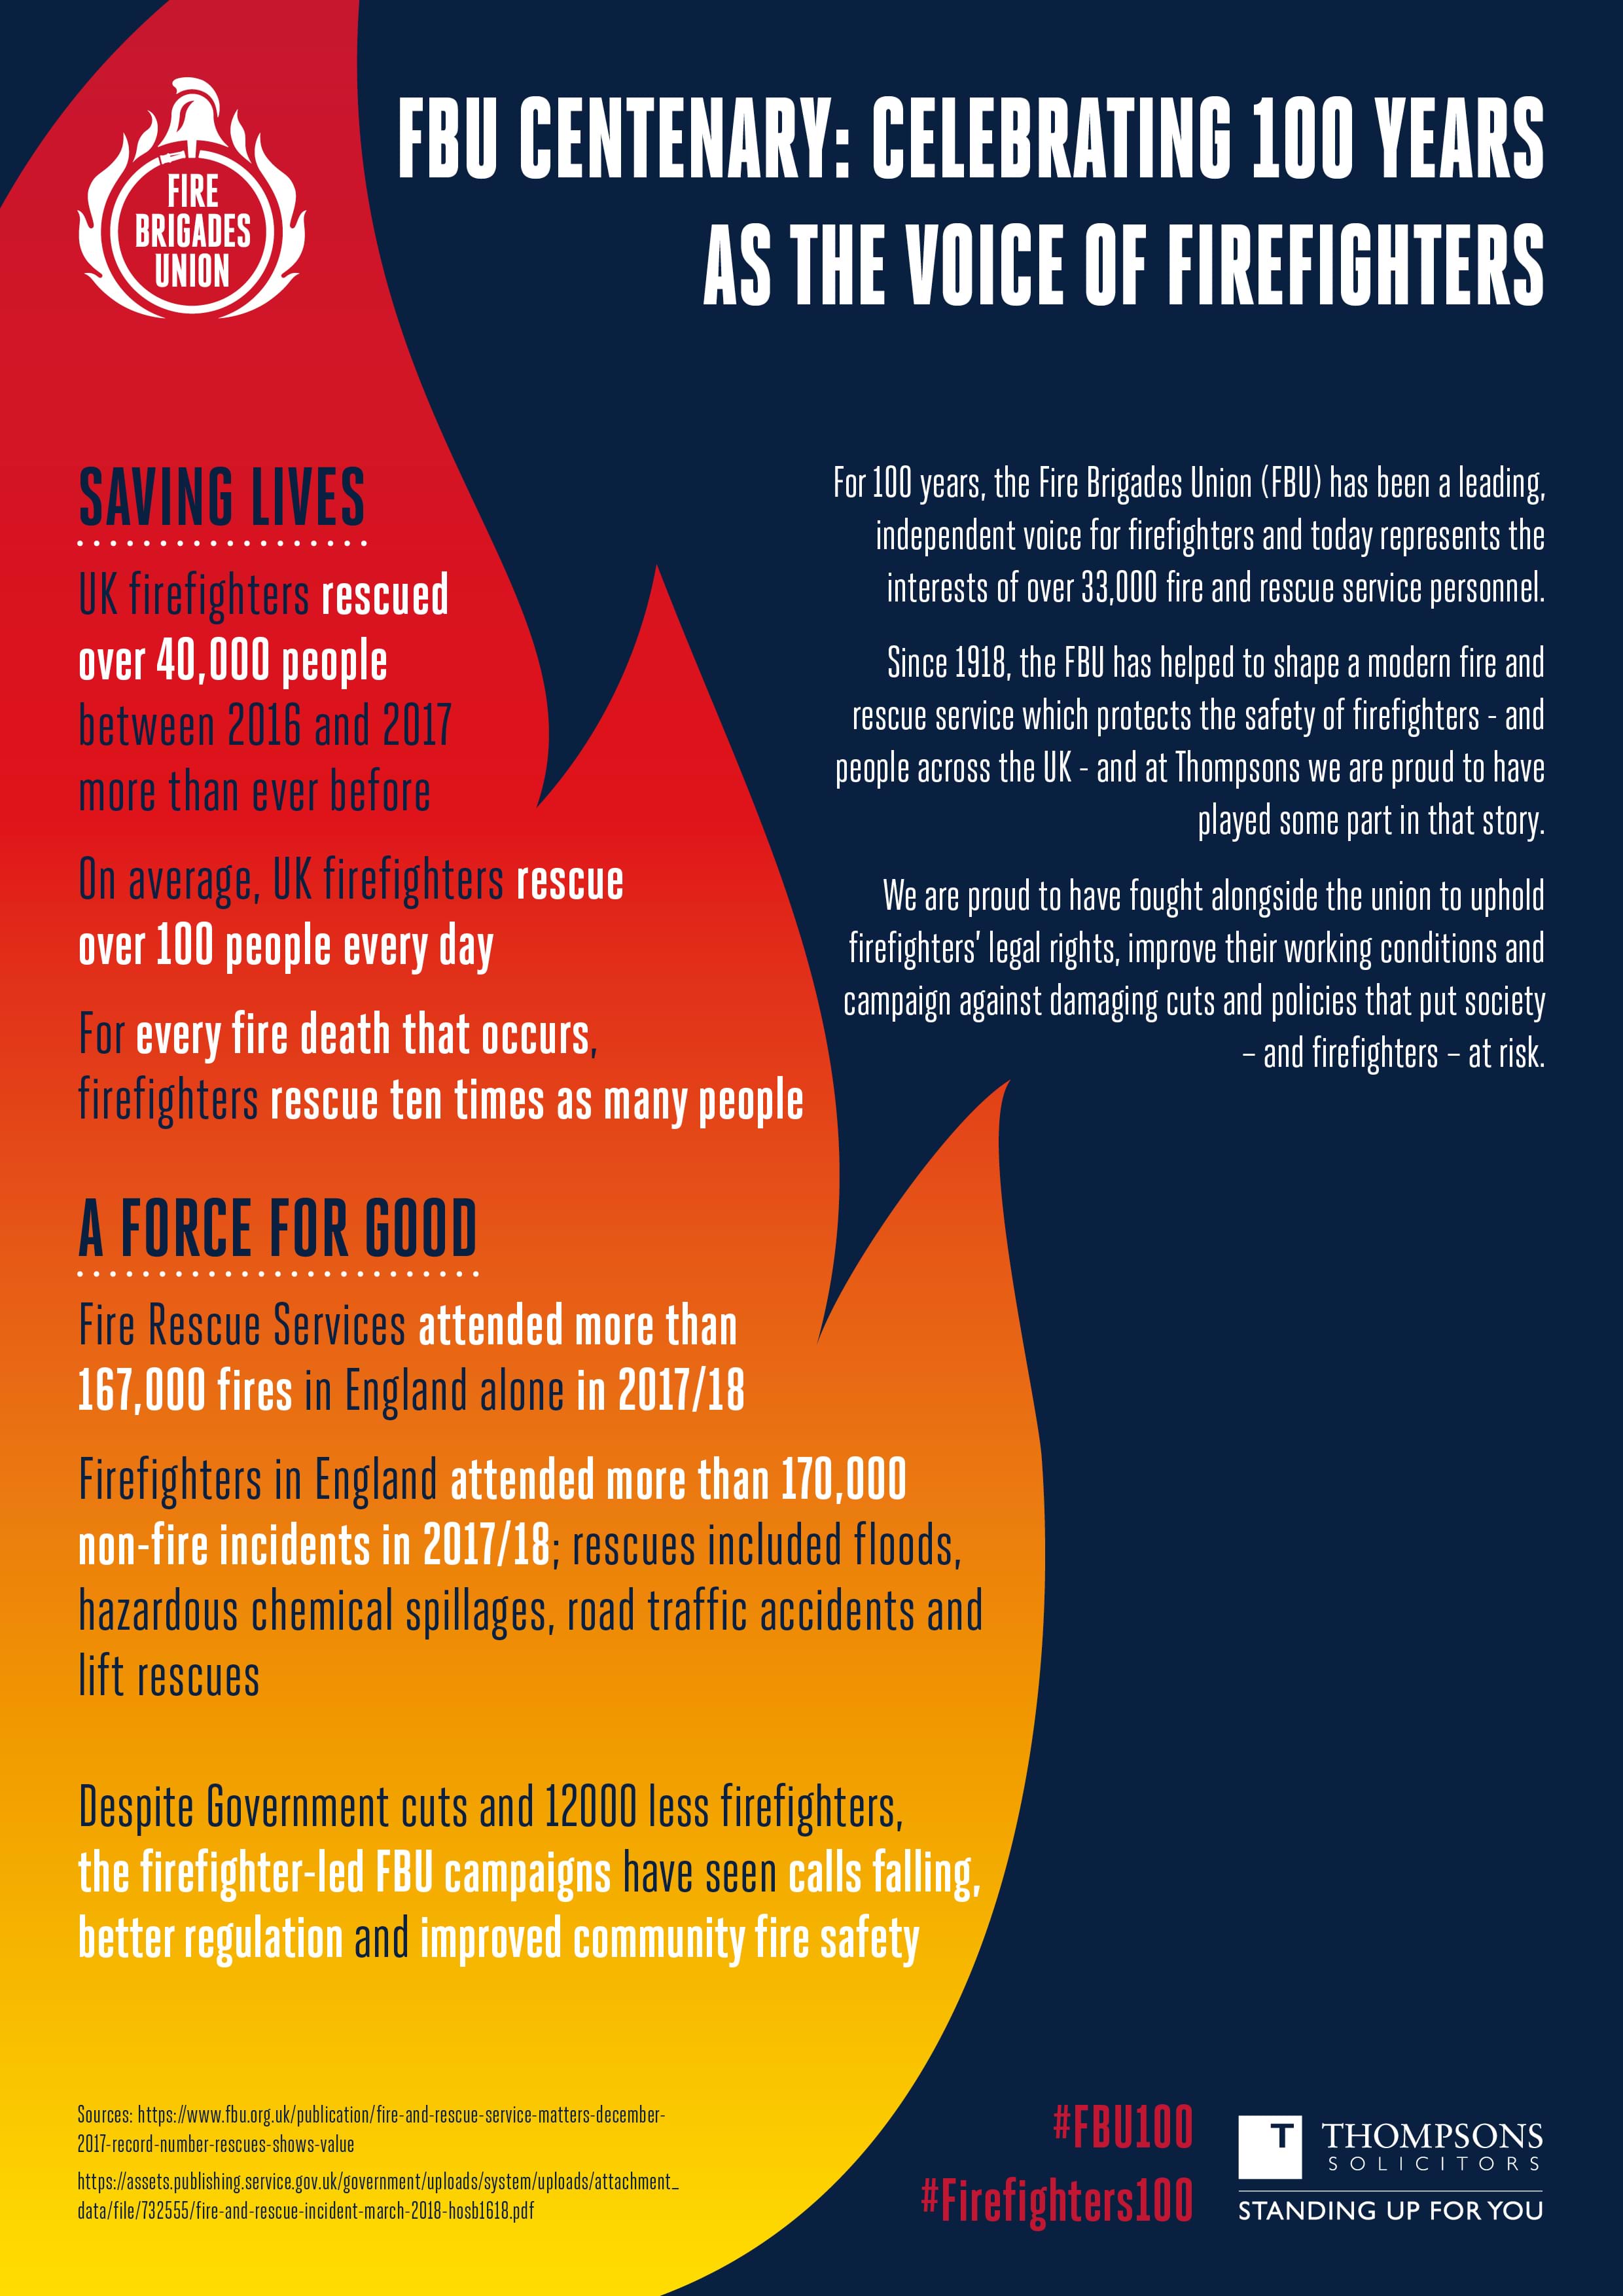 Statistics on the work done by Thompsons Solicitors with the Fire Brigades Union